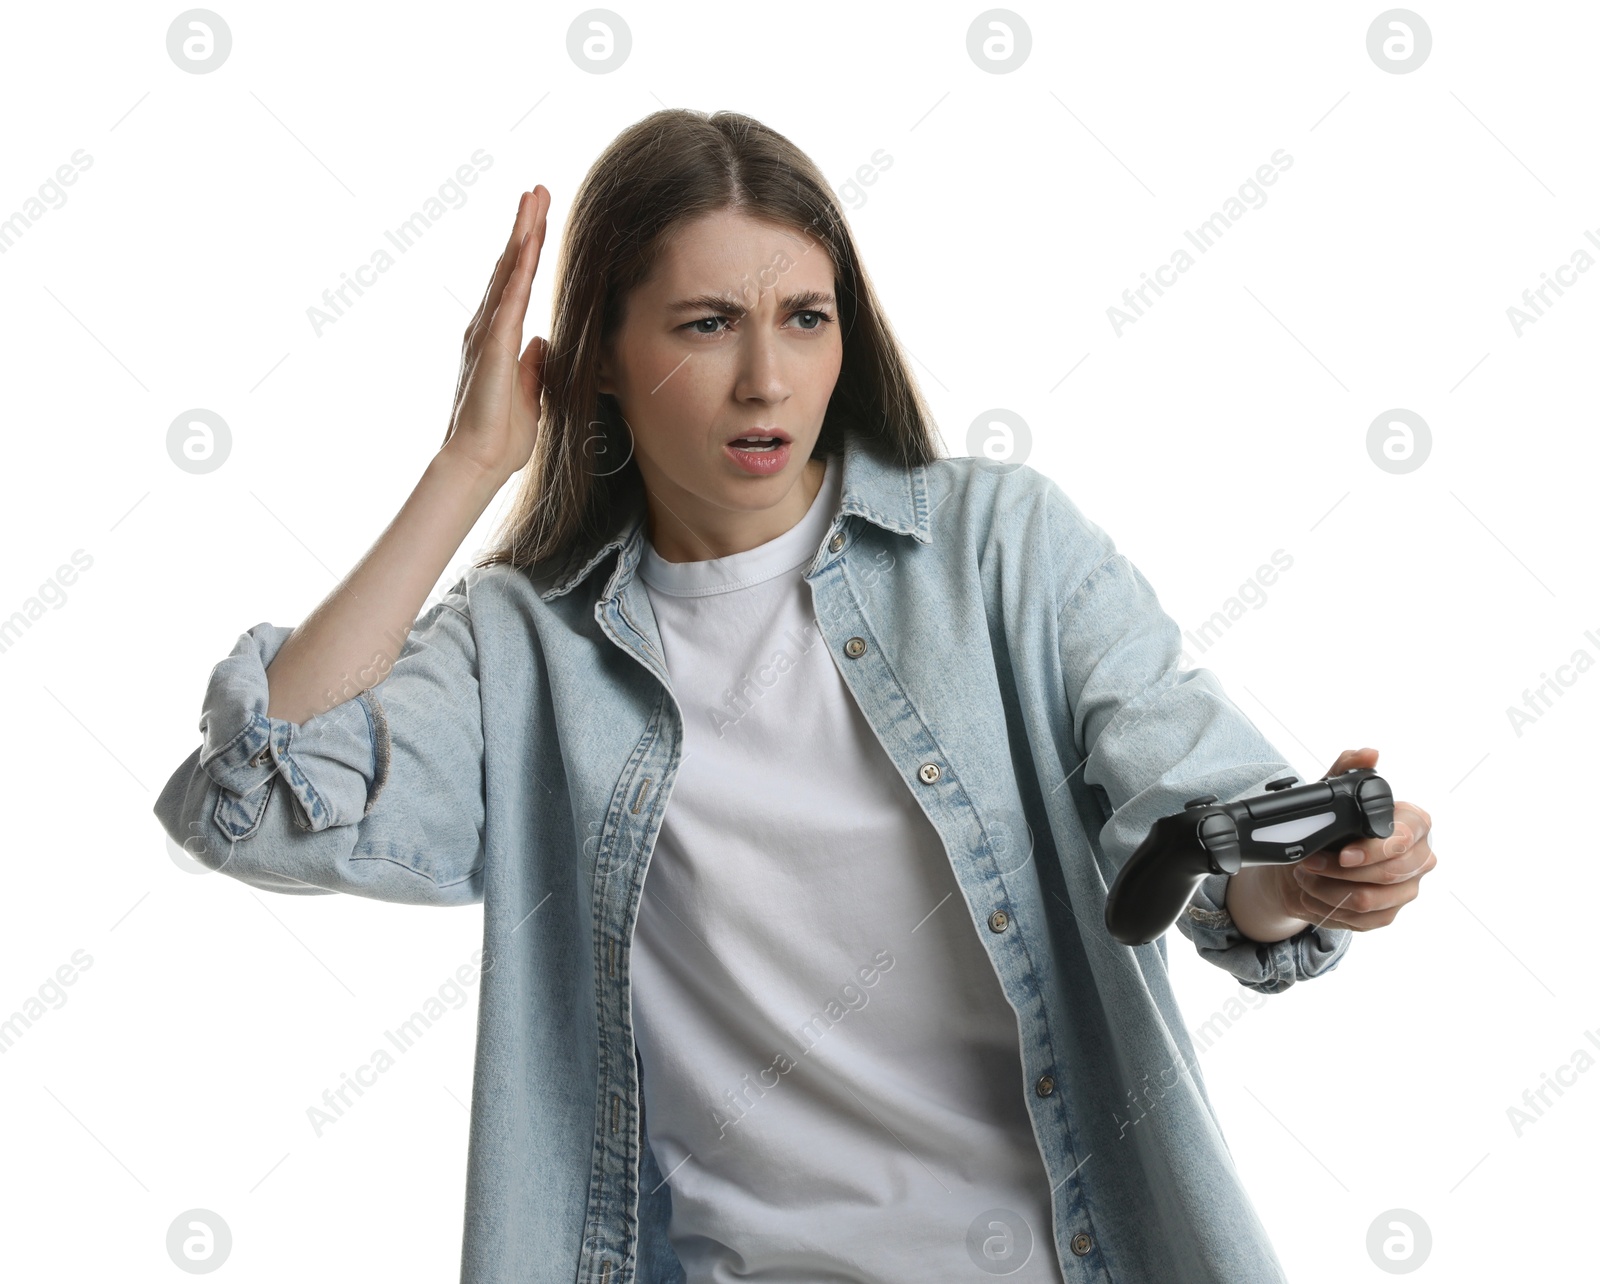 Photo of Surprised woman playing video games with controller on white background